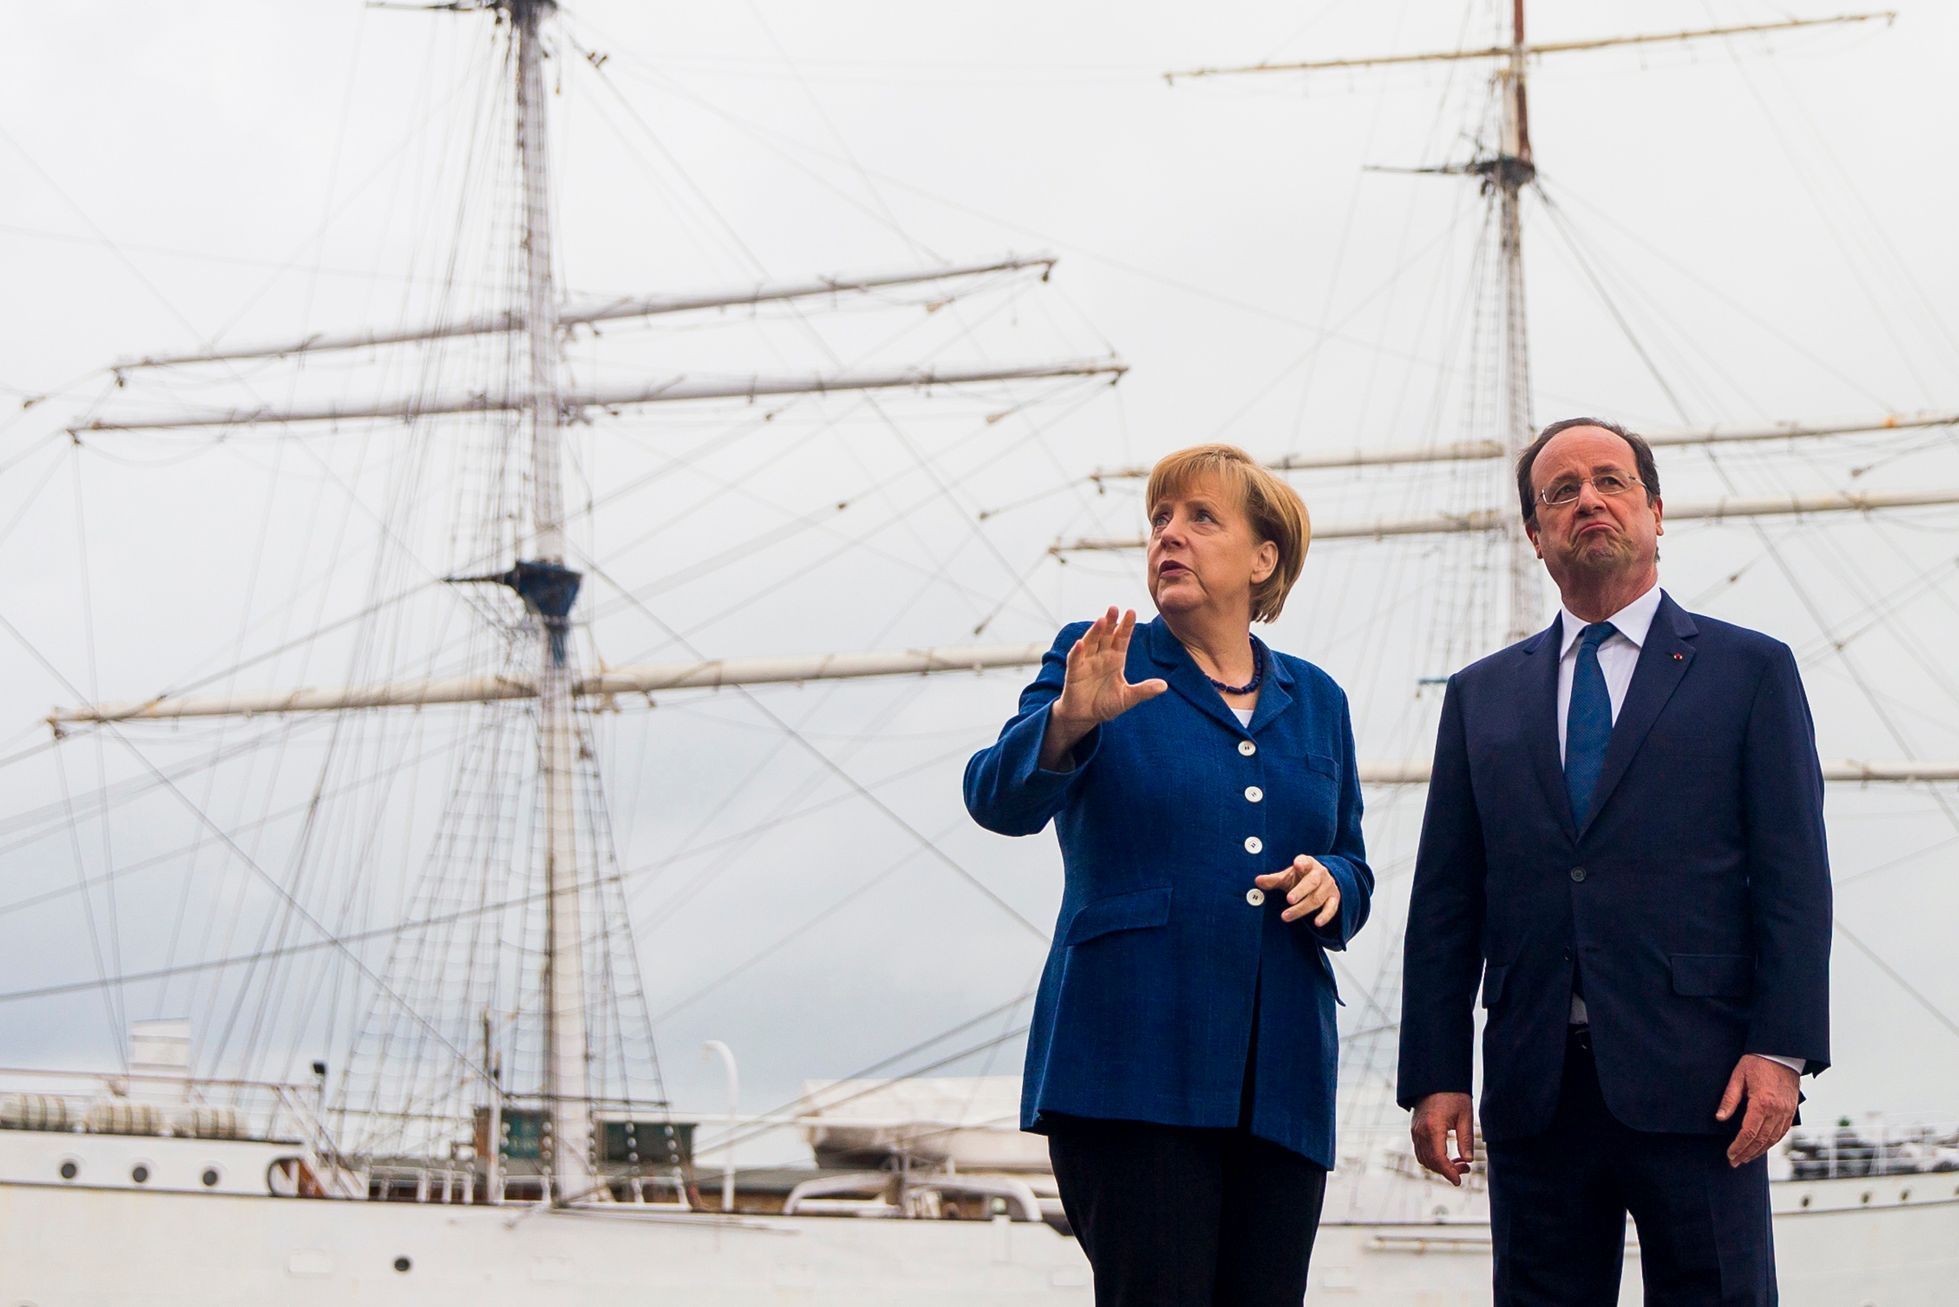 German Chancellor Merkel and French President Hollande pose for pictures in front of the tall ship Gorch Fock I, in Stralsund